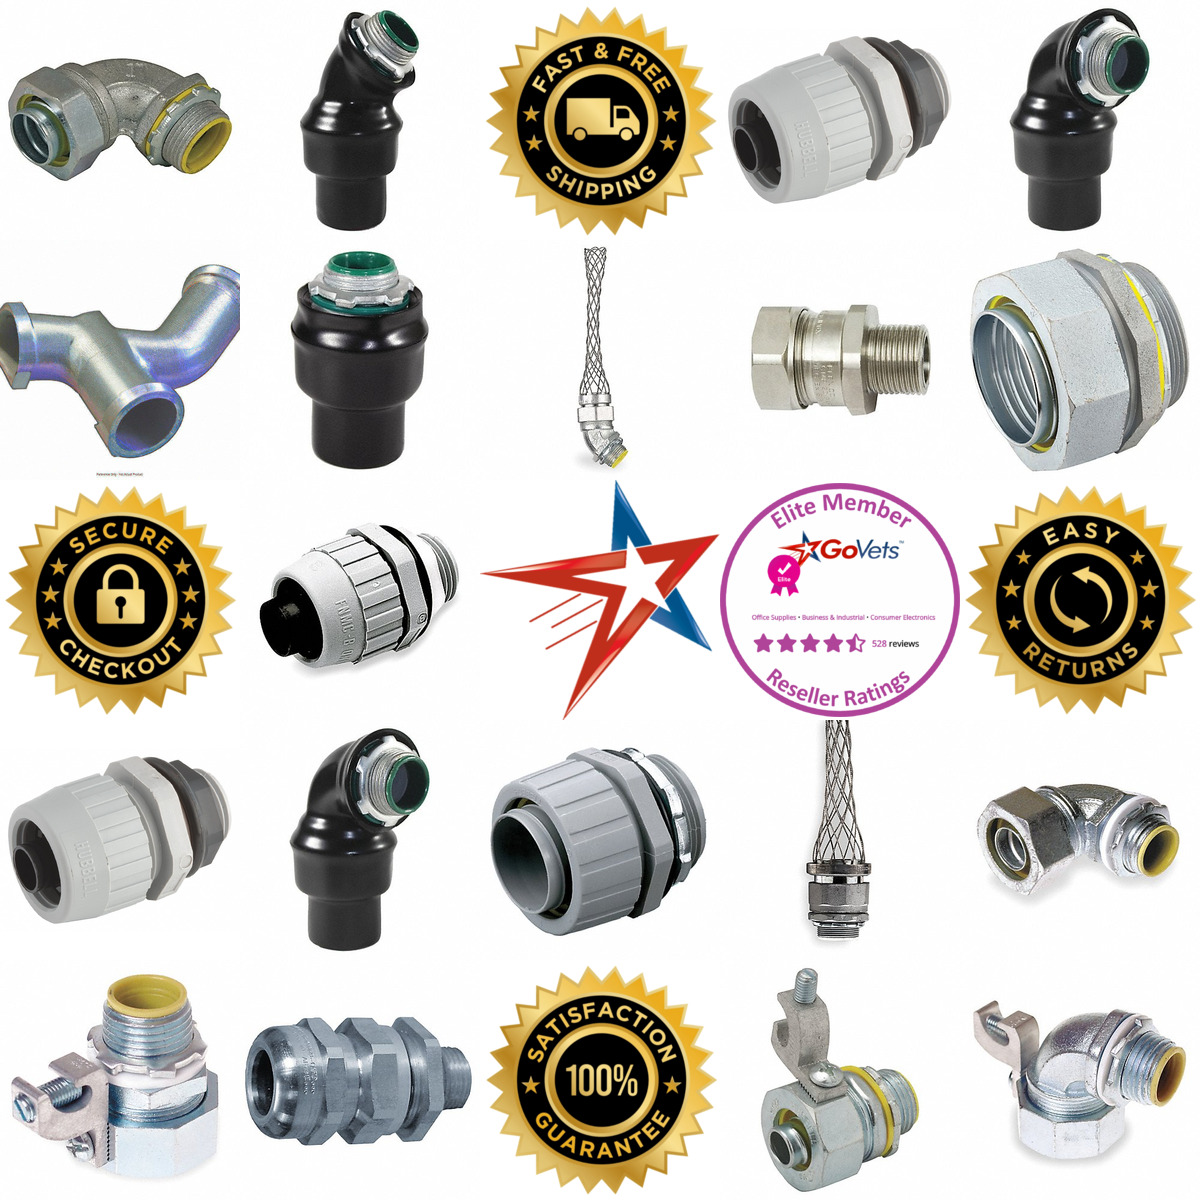 A selection of Liquid Tight Conduit Fittings products on GoVets